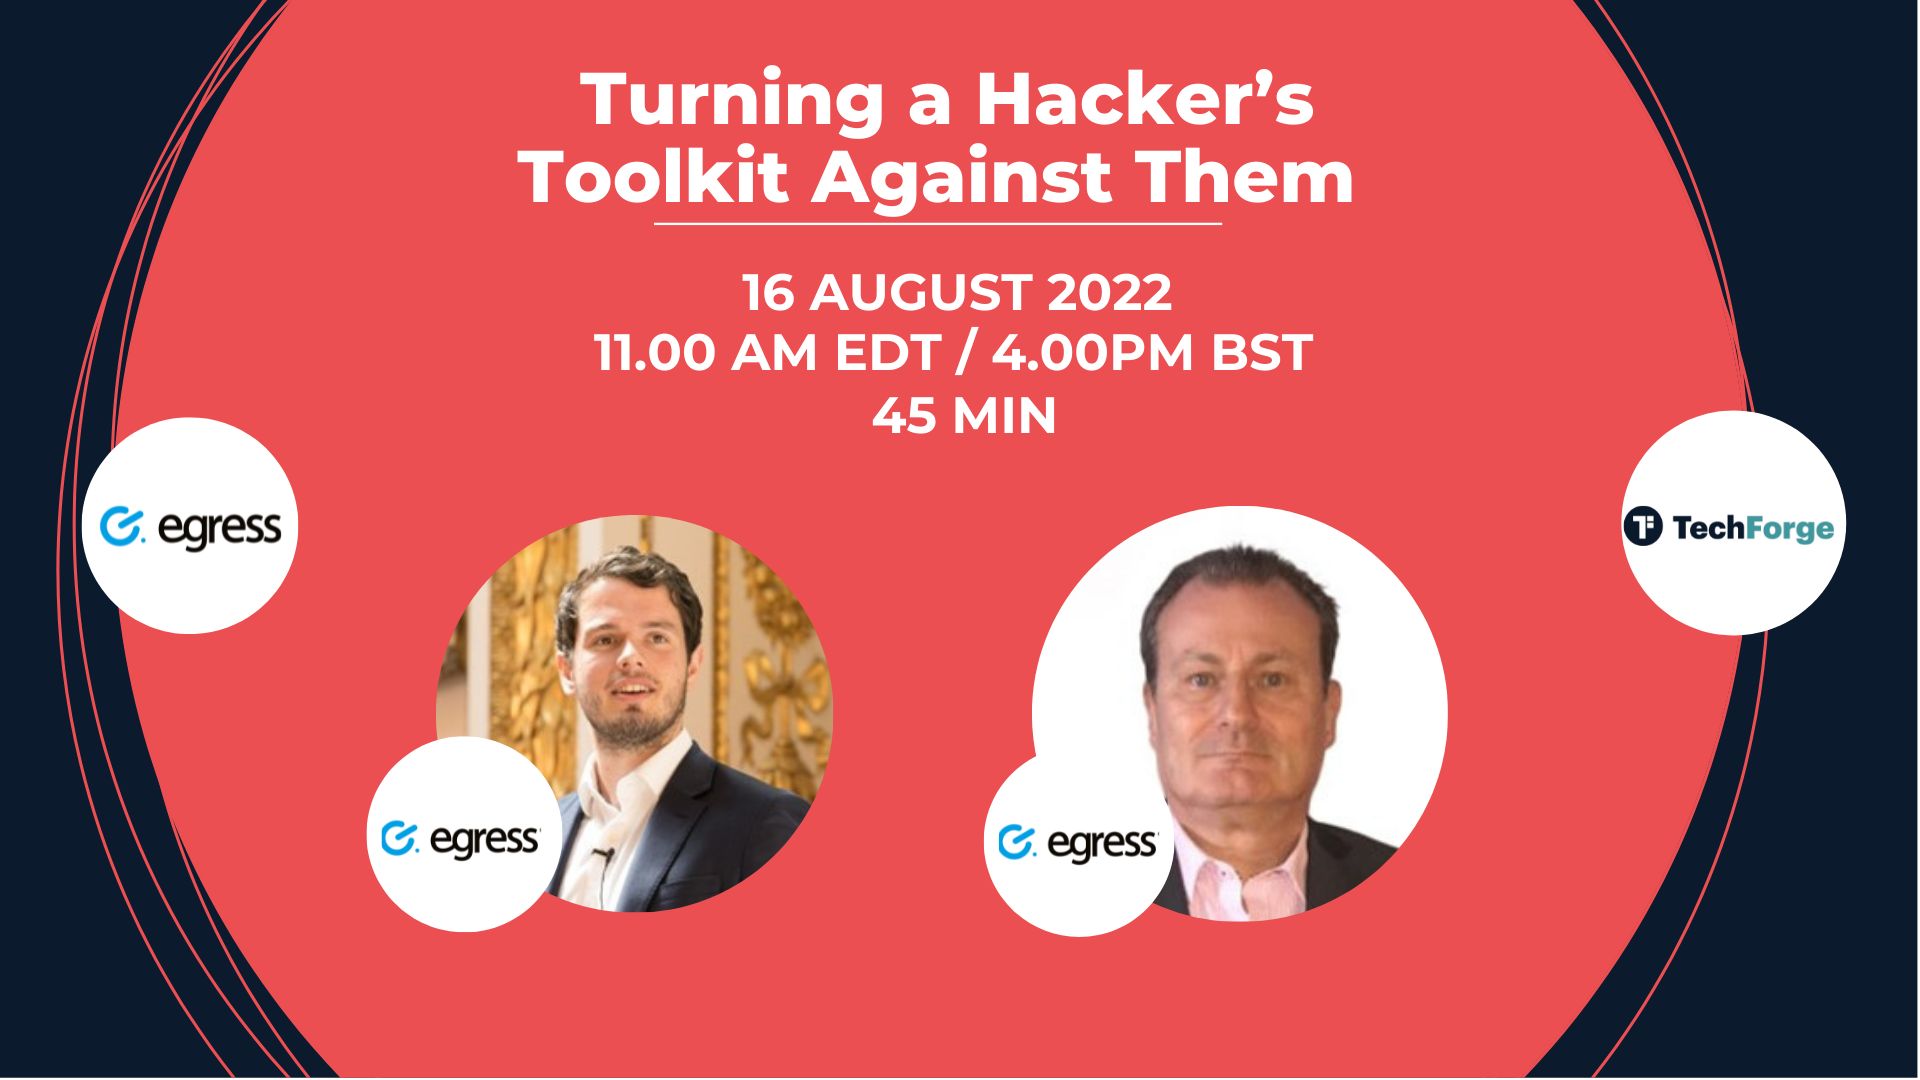 Live Webinar - Turning a Hacker's Toolkit Against Them, Online Event